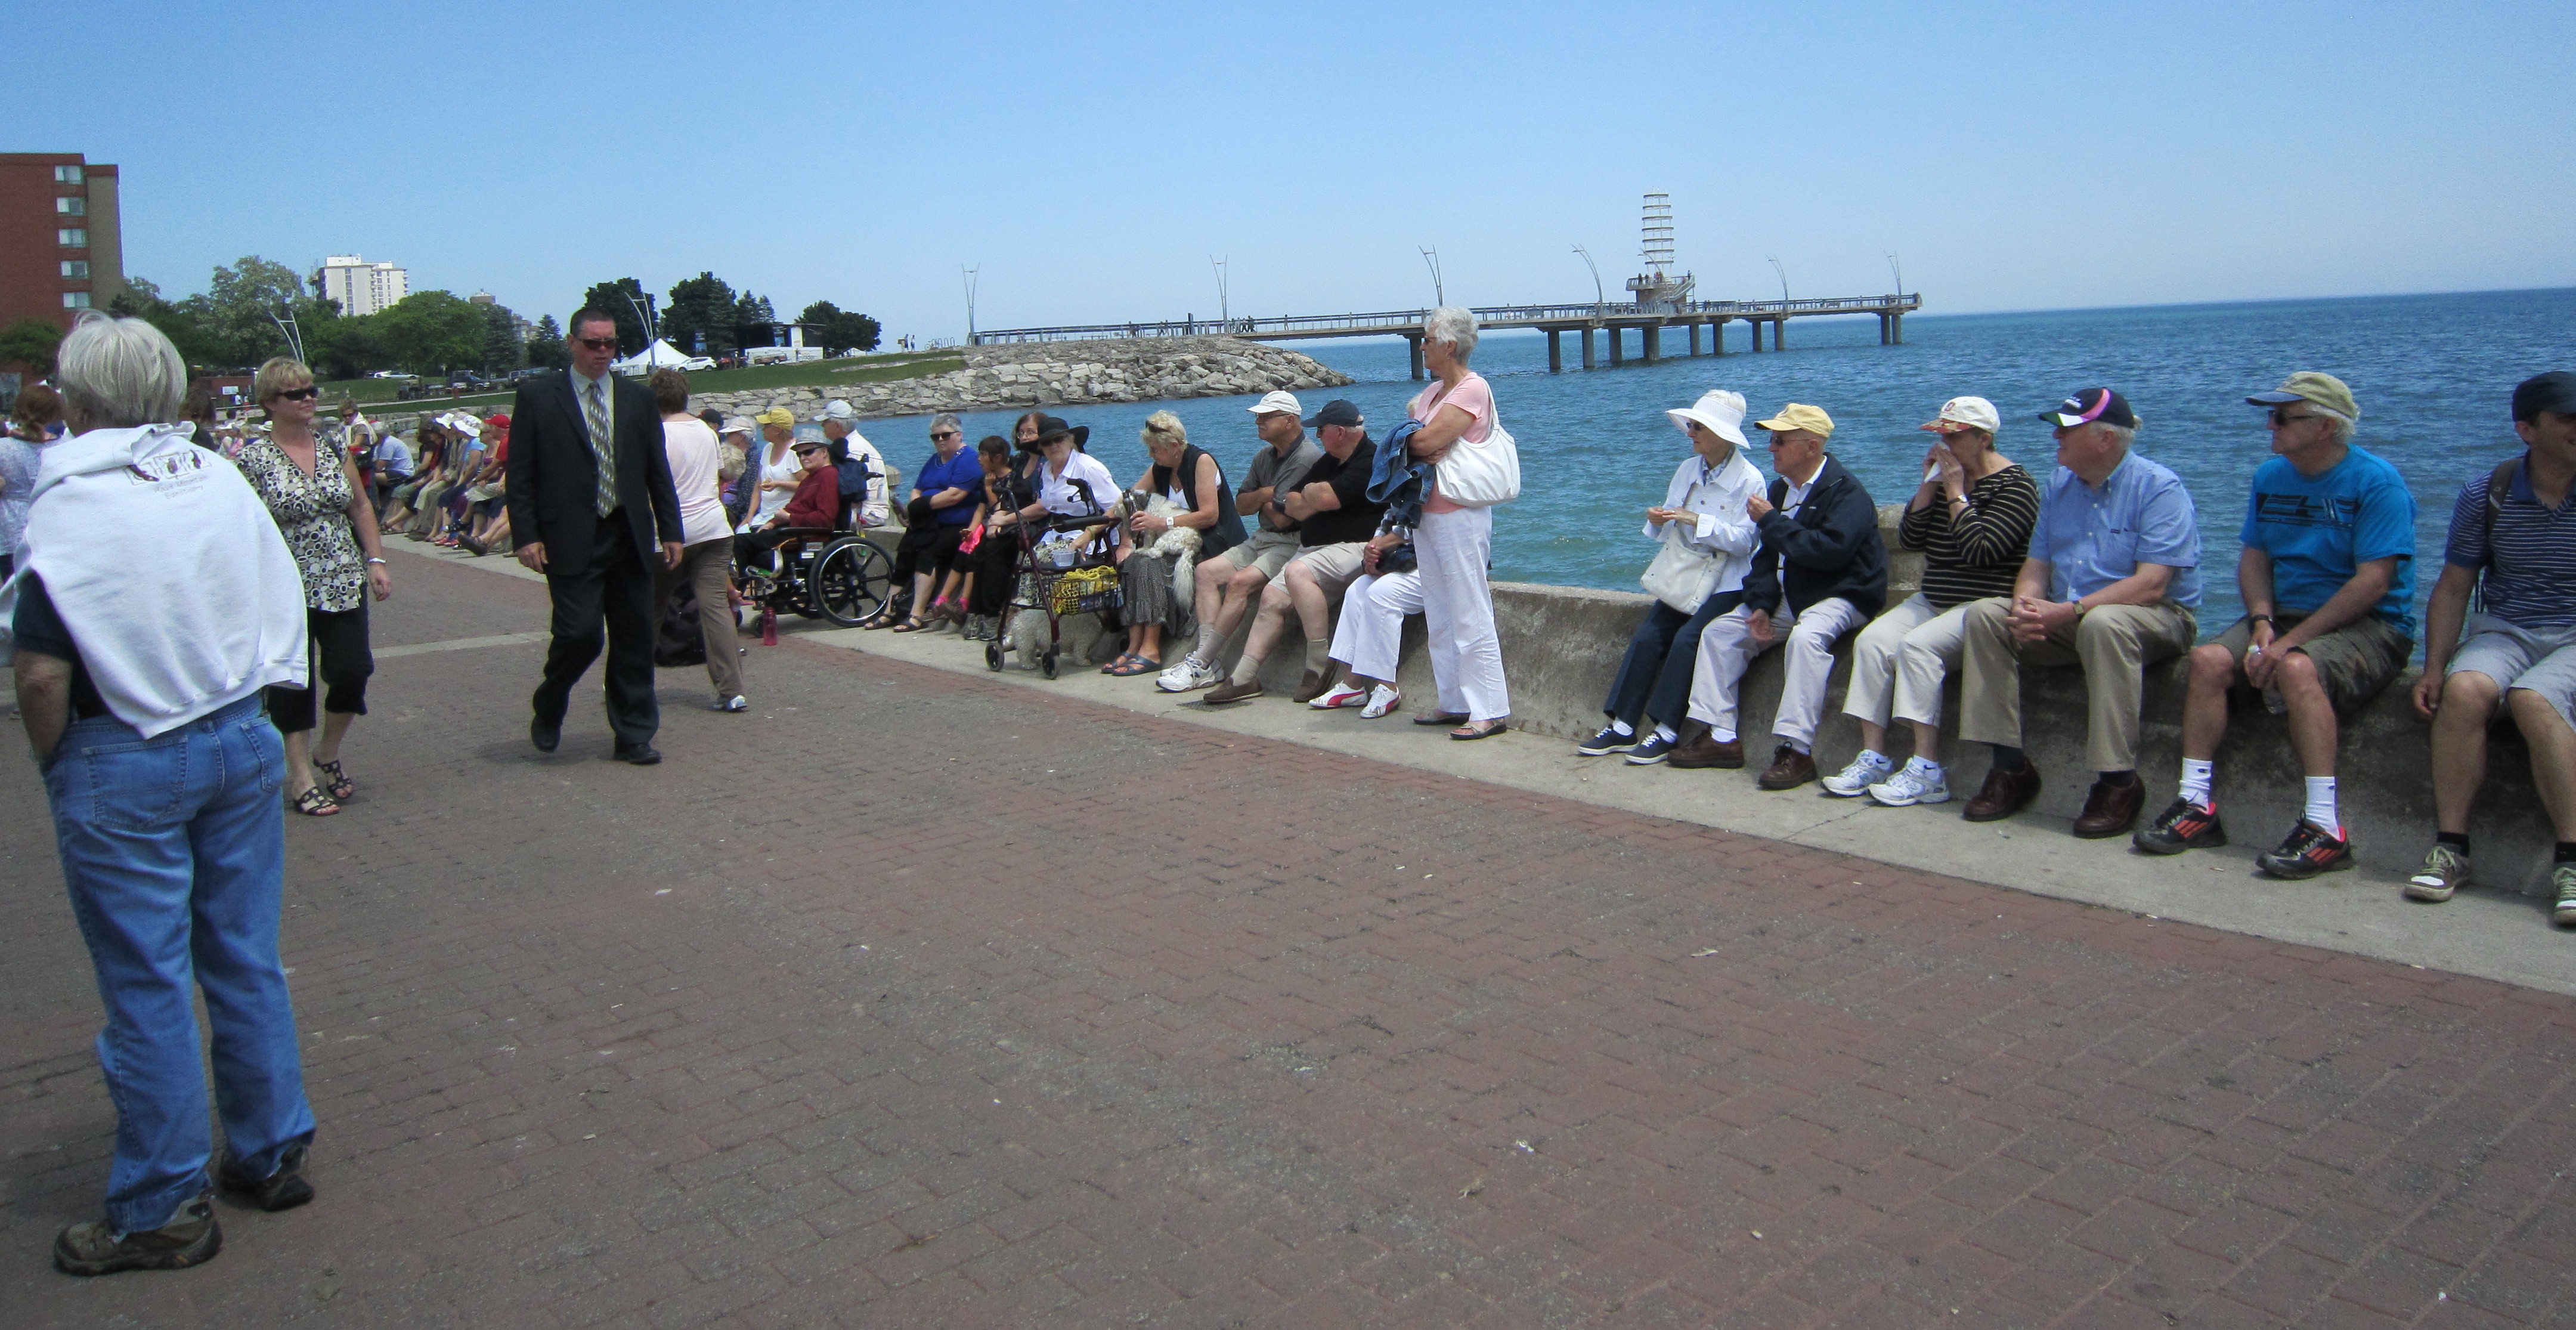 The ceremonies over the Naval Promenade becomes the fous with the Seniors' out in force listening to the All MAle Welsh Choir. Strolling along is Craig Stevens, the city's project manager on the pier project. He direction and oversight kept the project going when it got a little wonky at times - but that's another story.